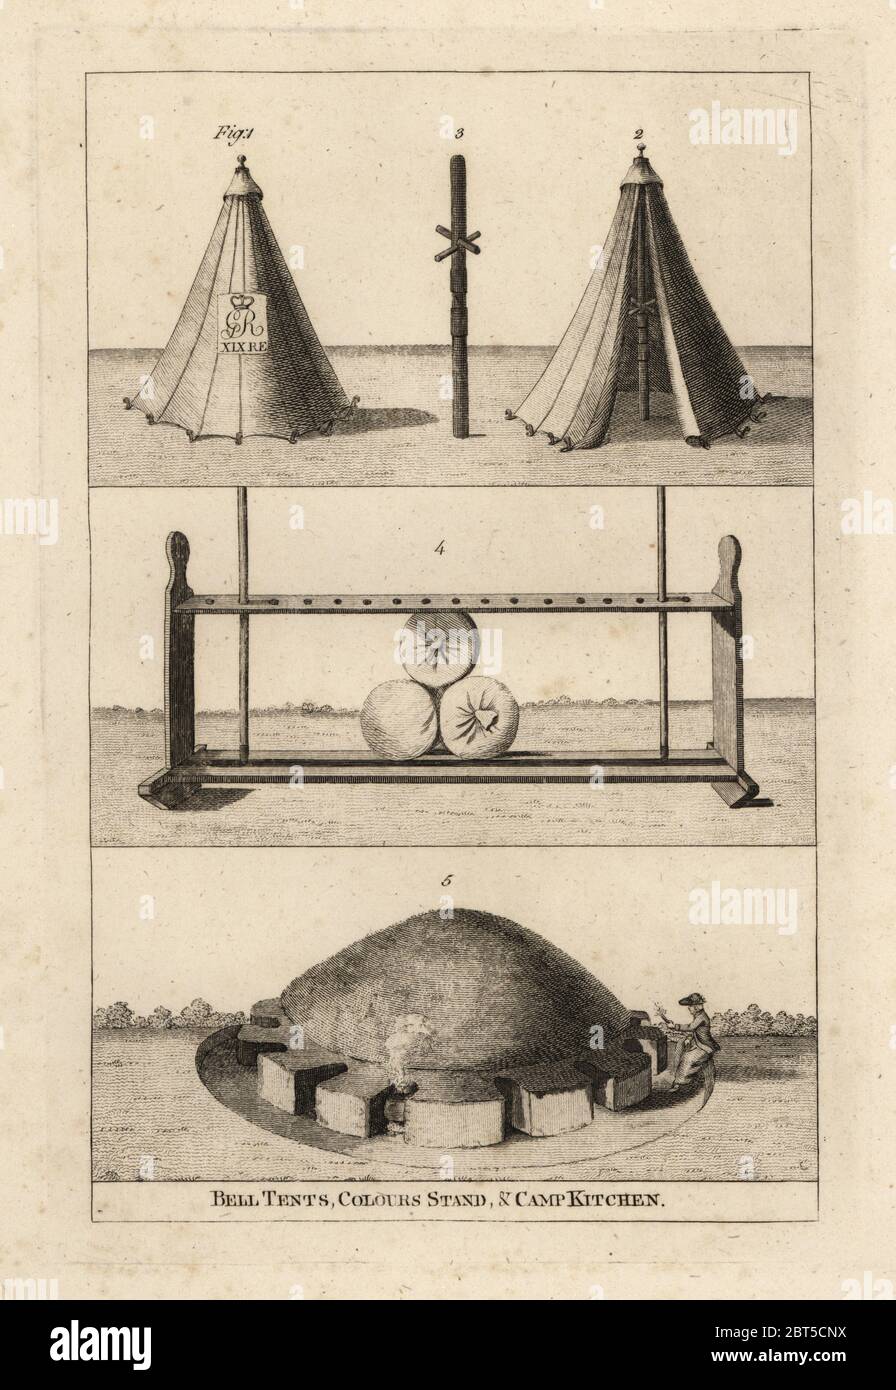 18th century military tents: called bell-tents 1,2, pole to support arms 3, stand for drums, colours and officers espontons 4, and camp-kitchen with a woman cooking 5.Copperplate engraving from Francis Grose's Military Antiquities respecting a History of the English Army, Stockdale, London, 1812. Stock Photo